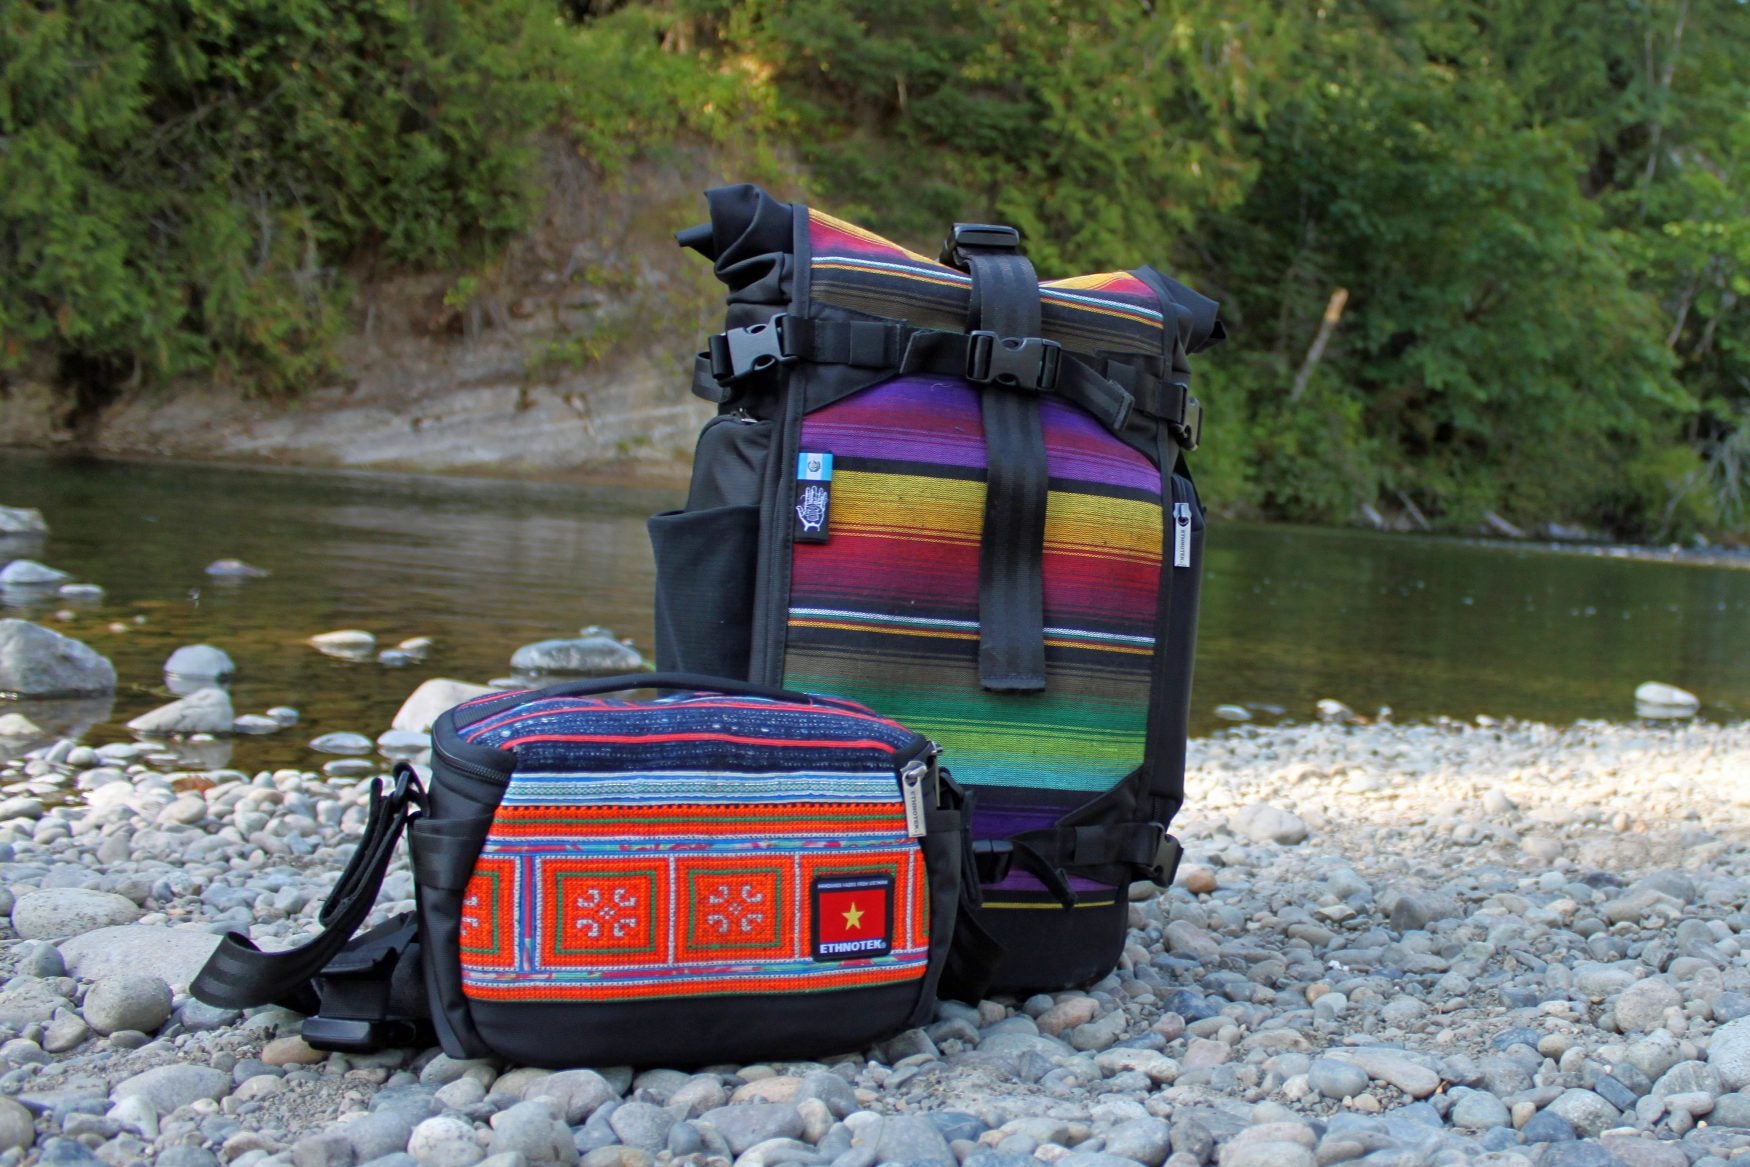 This Stylish Camera Bag from Ethnotek Just Launched on Kickstarter